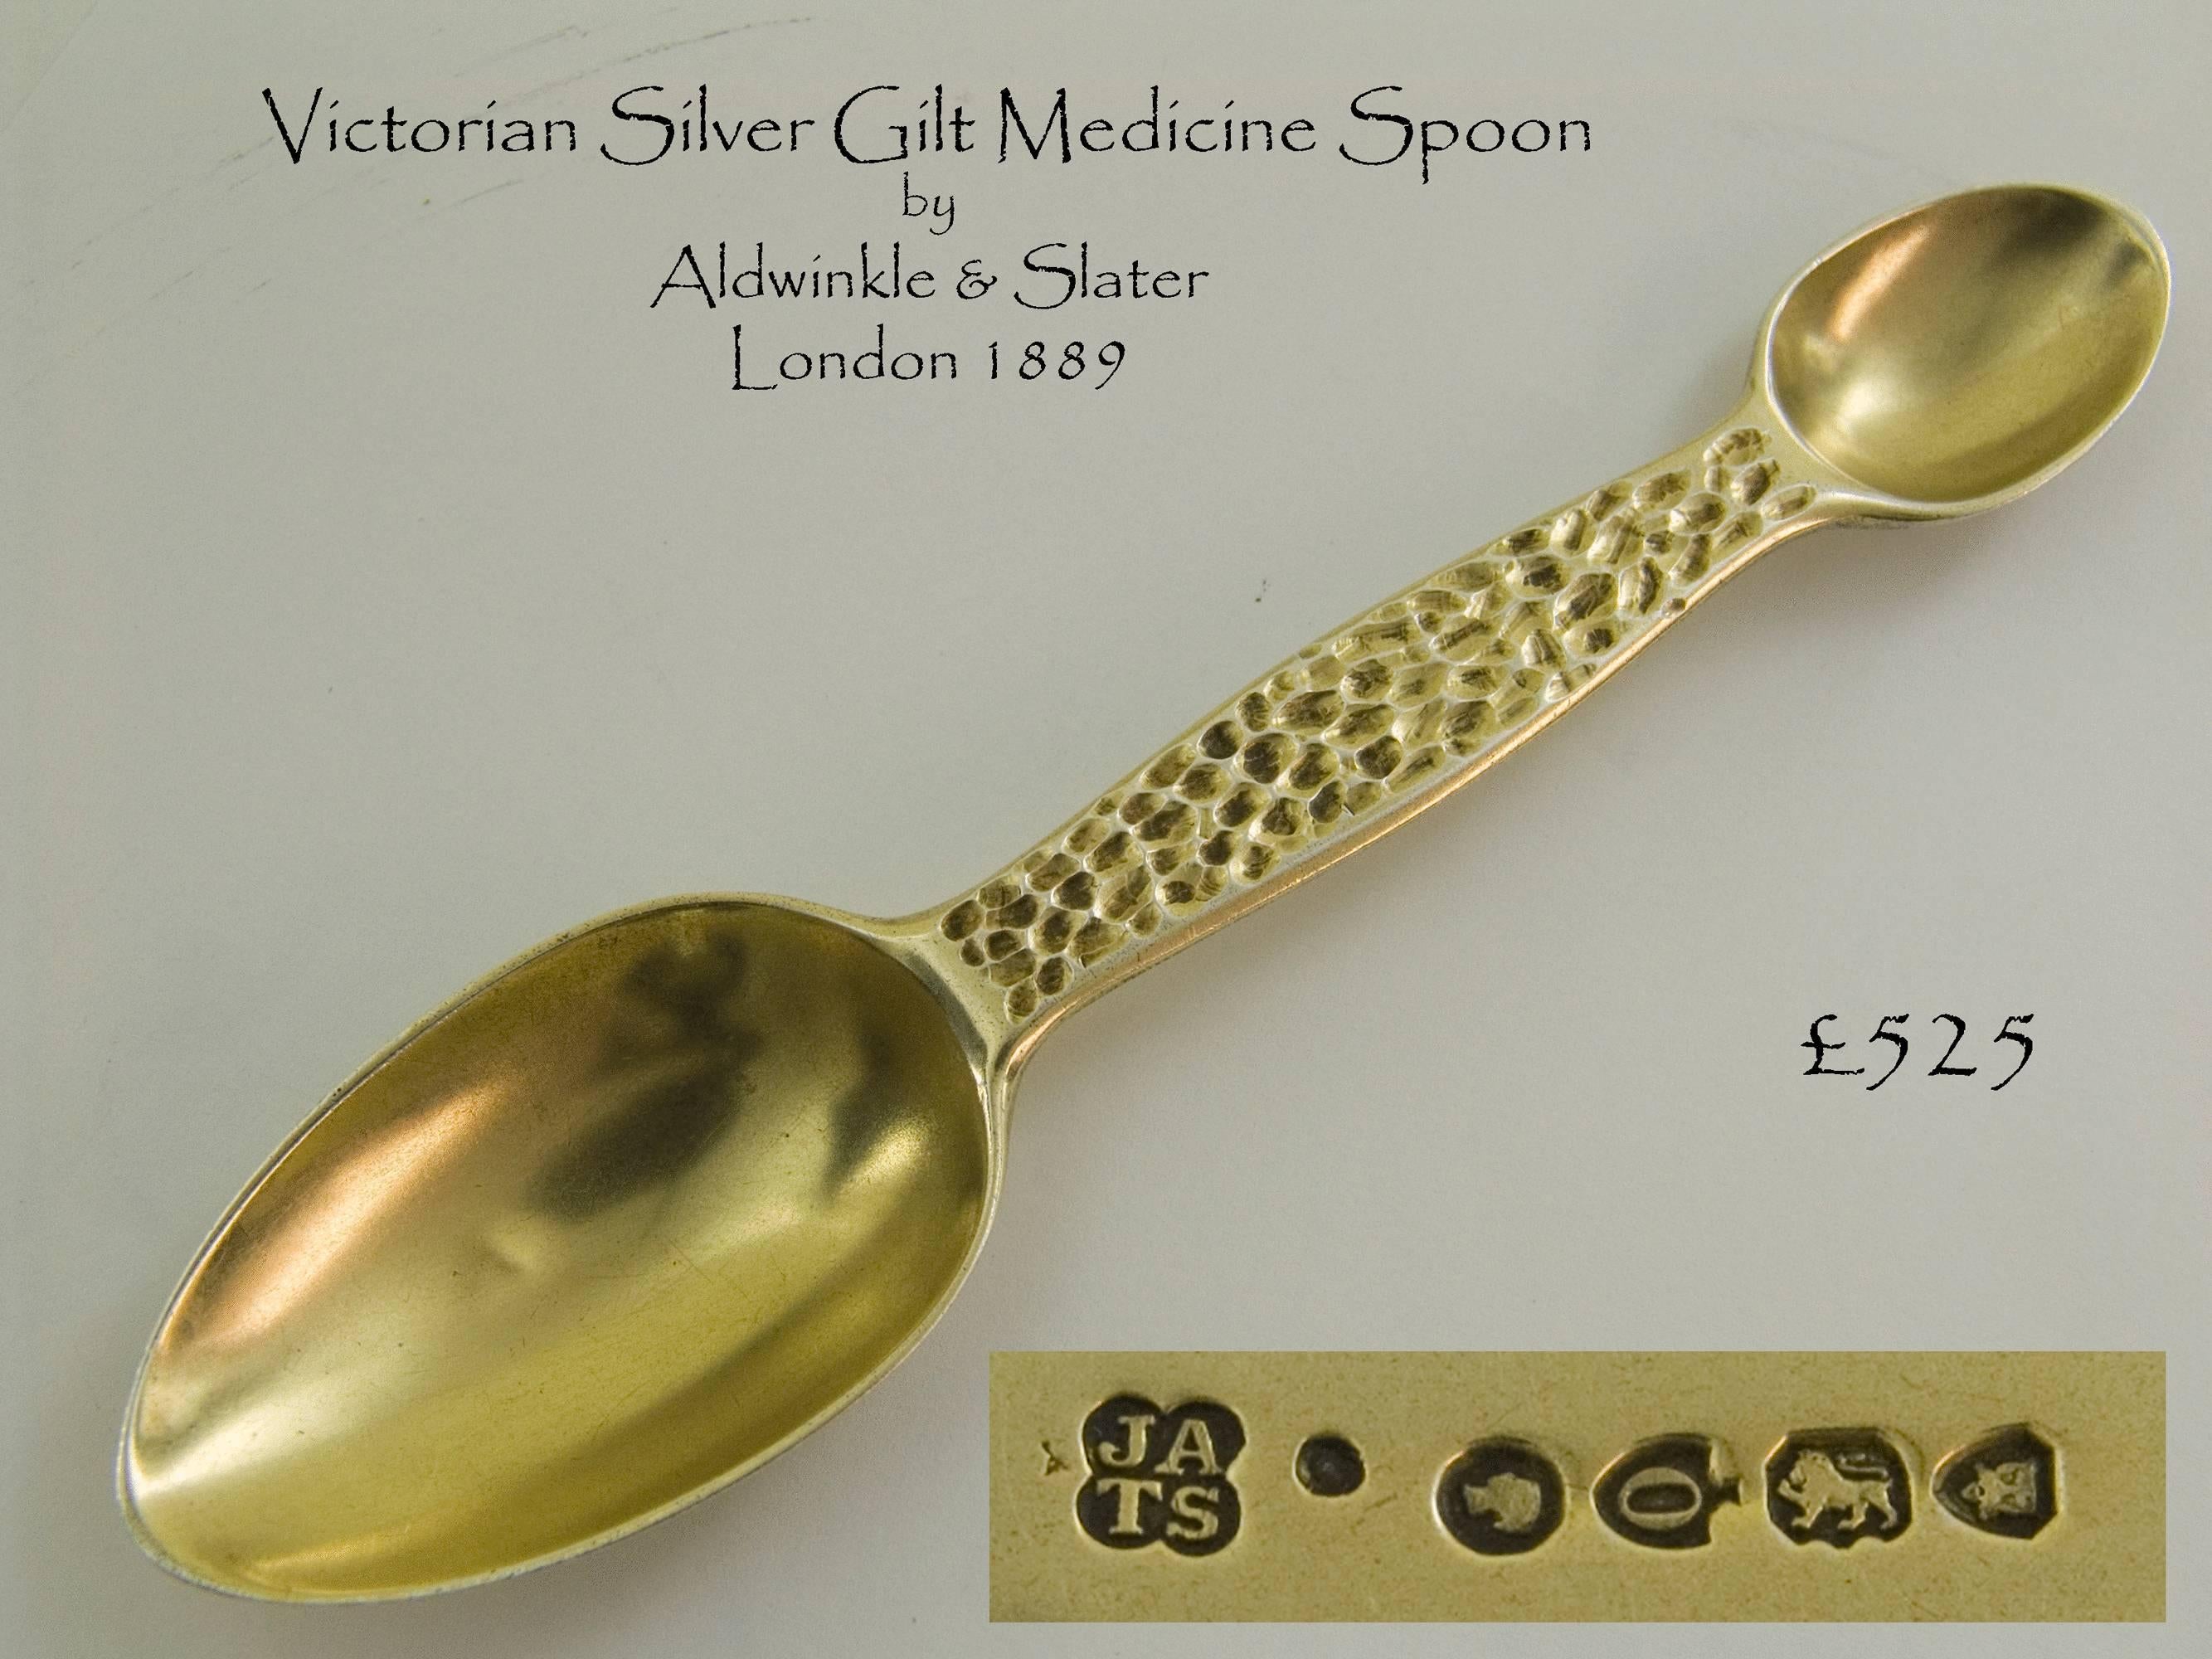 A very good Victorian medicine spoon with original gilding and having a hammered decorative finish to the handle.